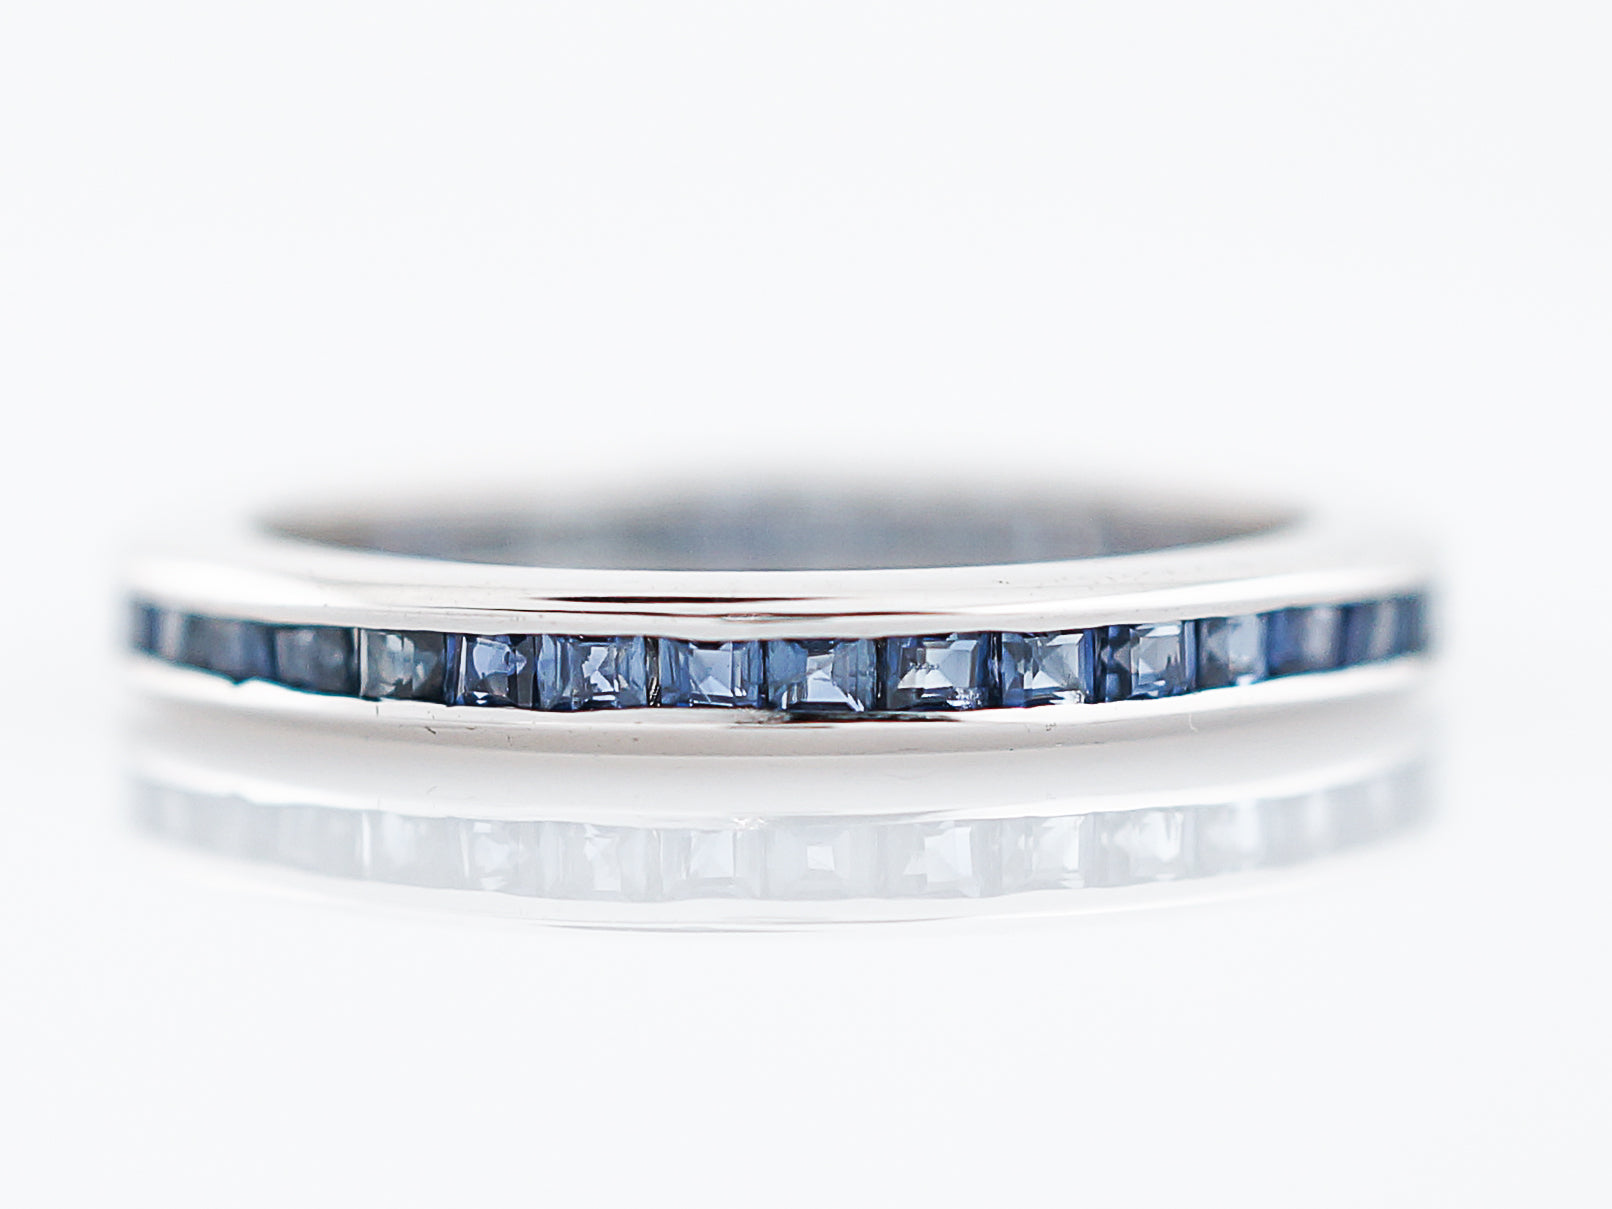 Eternity Wedding Band Modern 1.17 Square Cut Sapphire in 14k White Gold